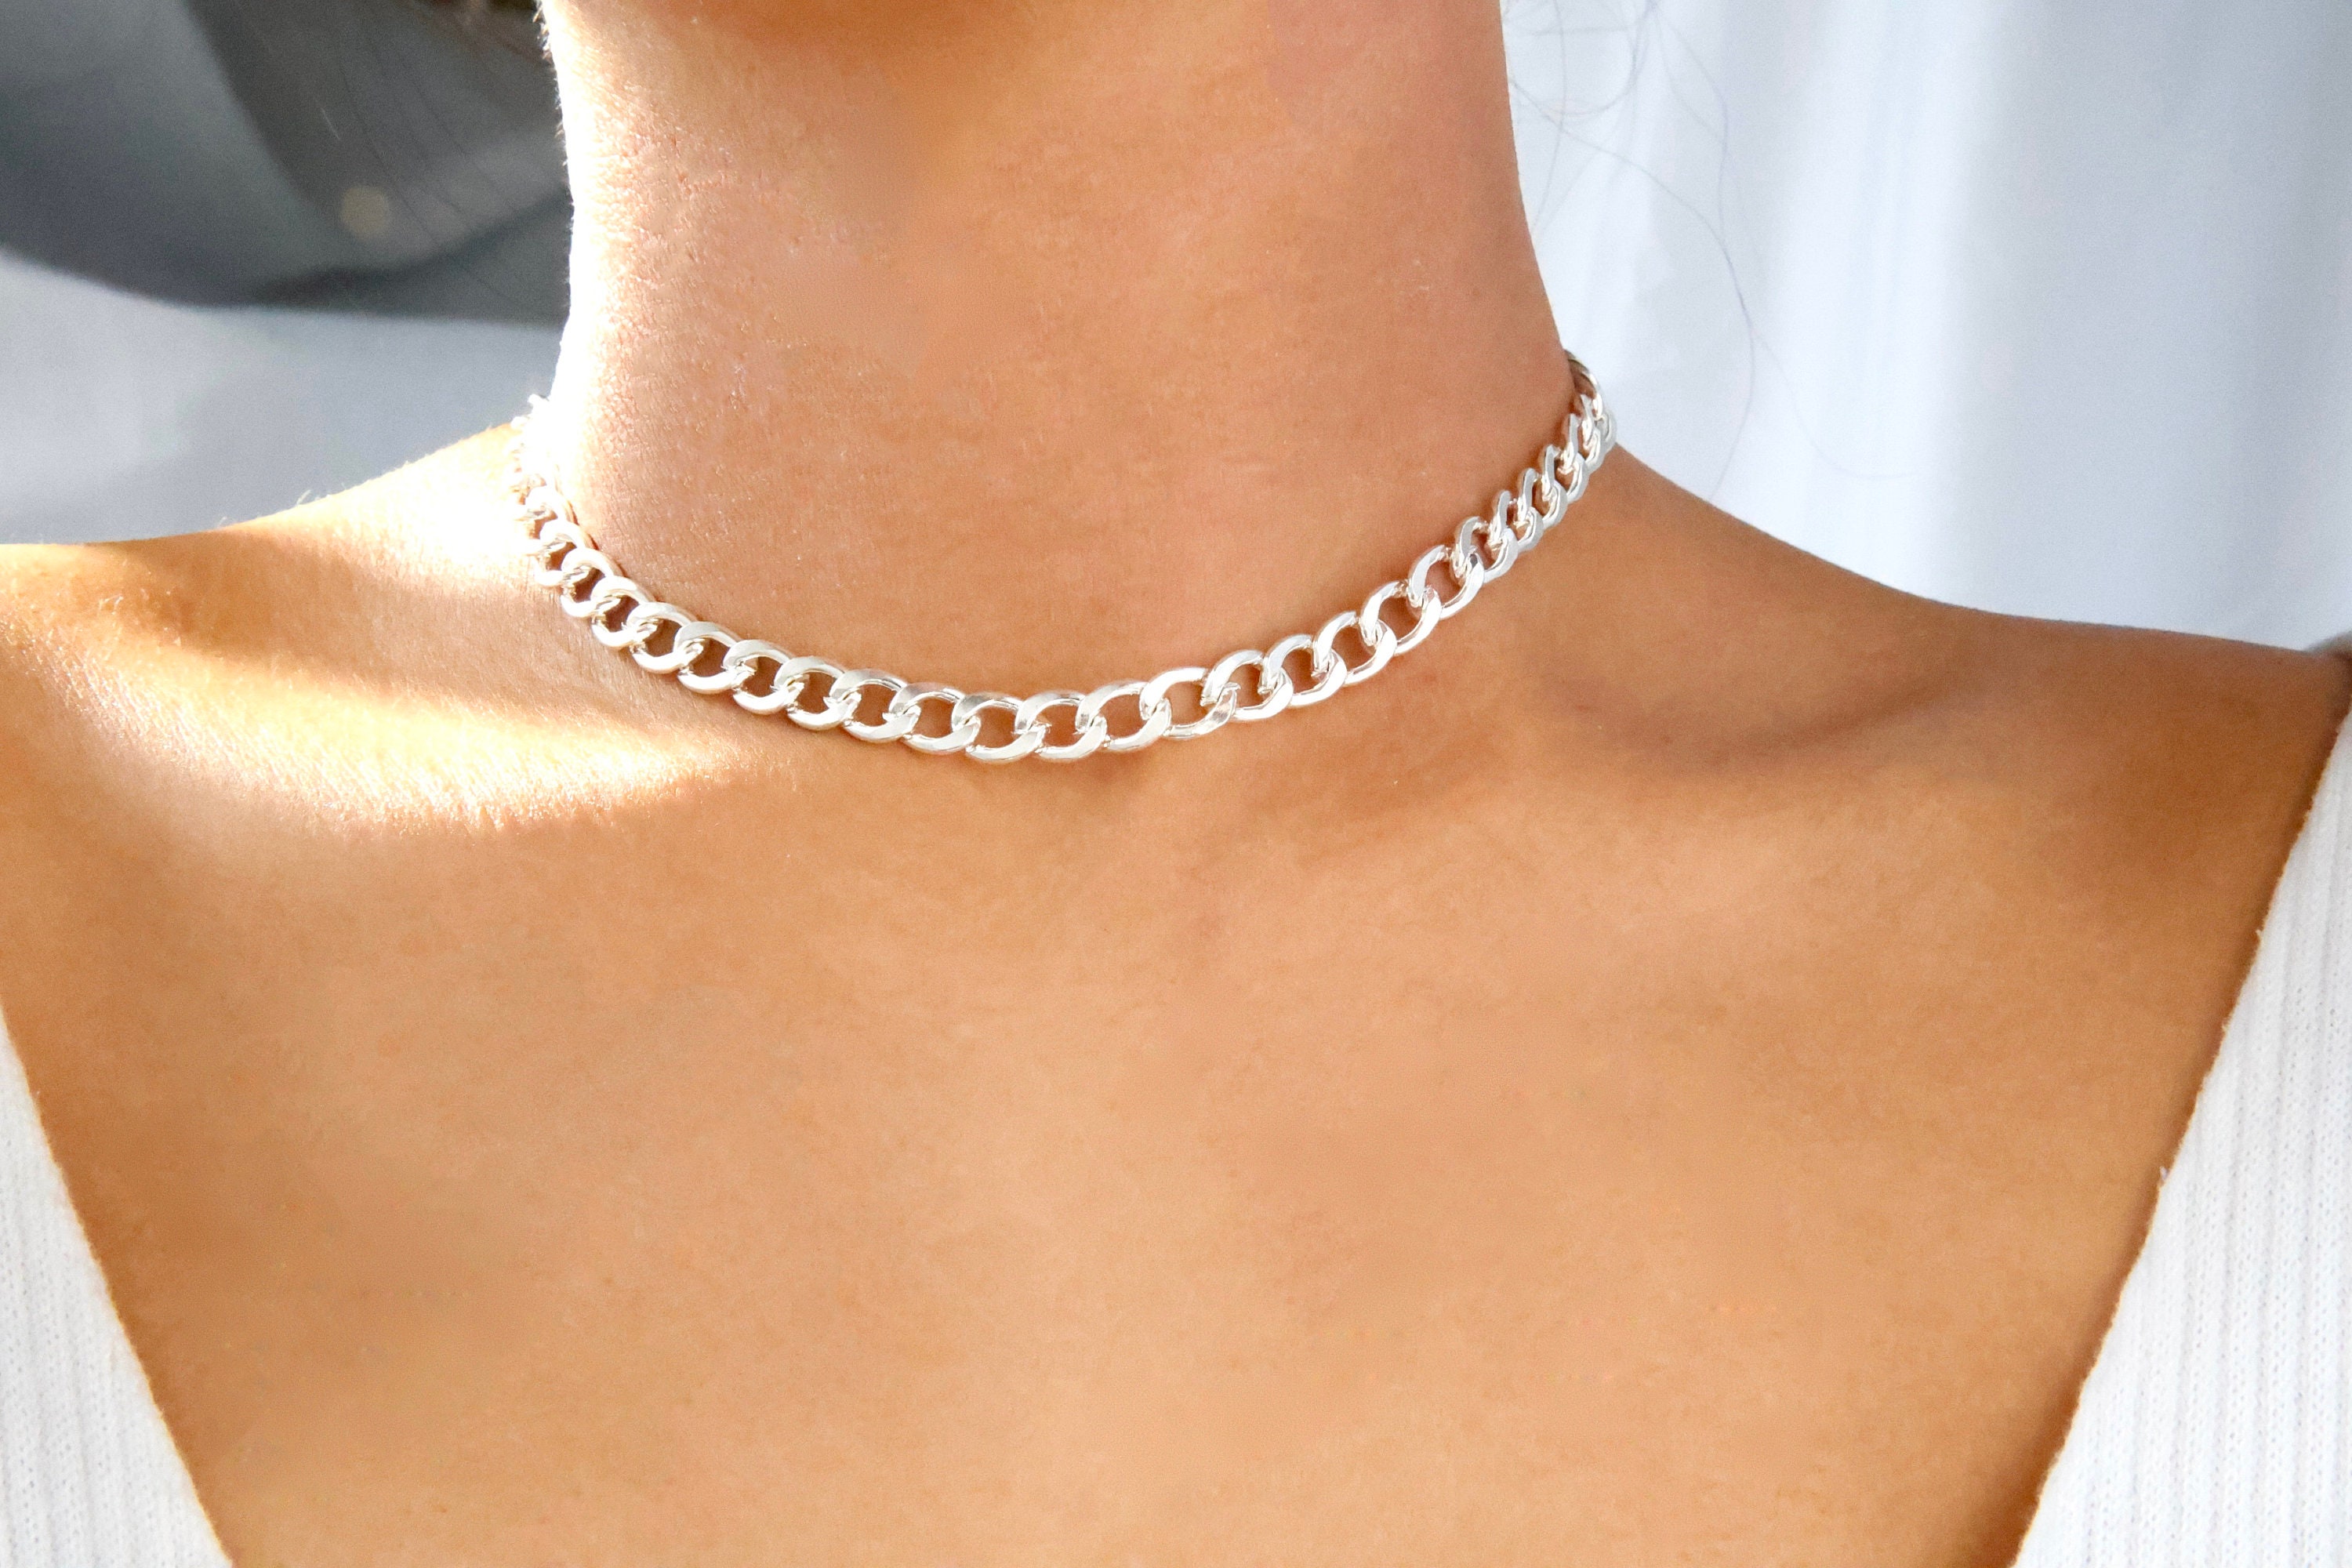 CHUNKY SILVER HAMMERED Big Heart Black Leather Cord Collar Choker Necklace  Boho £13.99 - PicClick UK